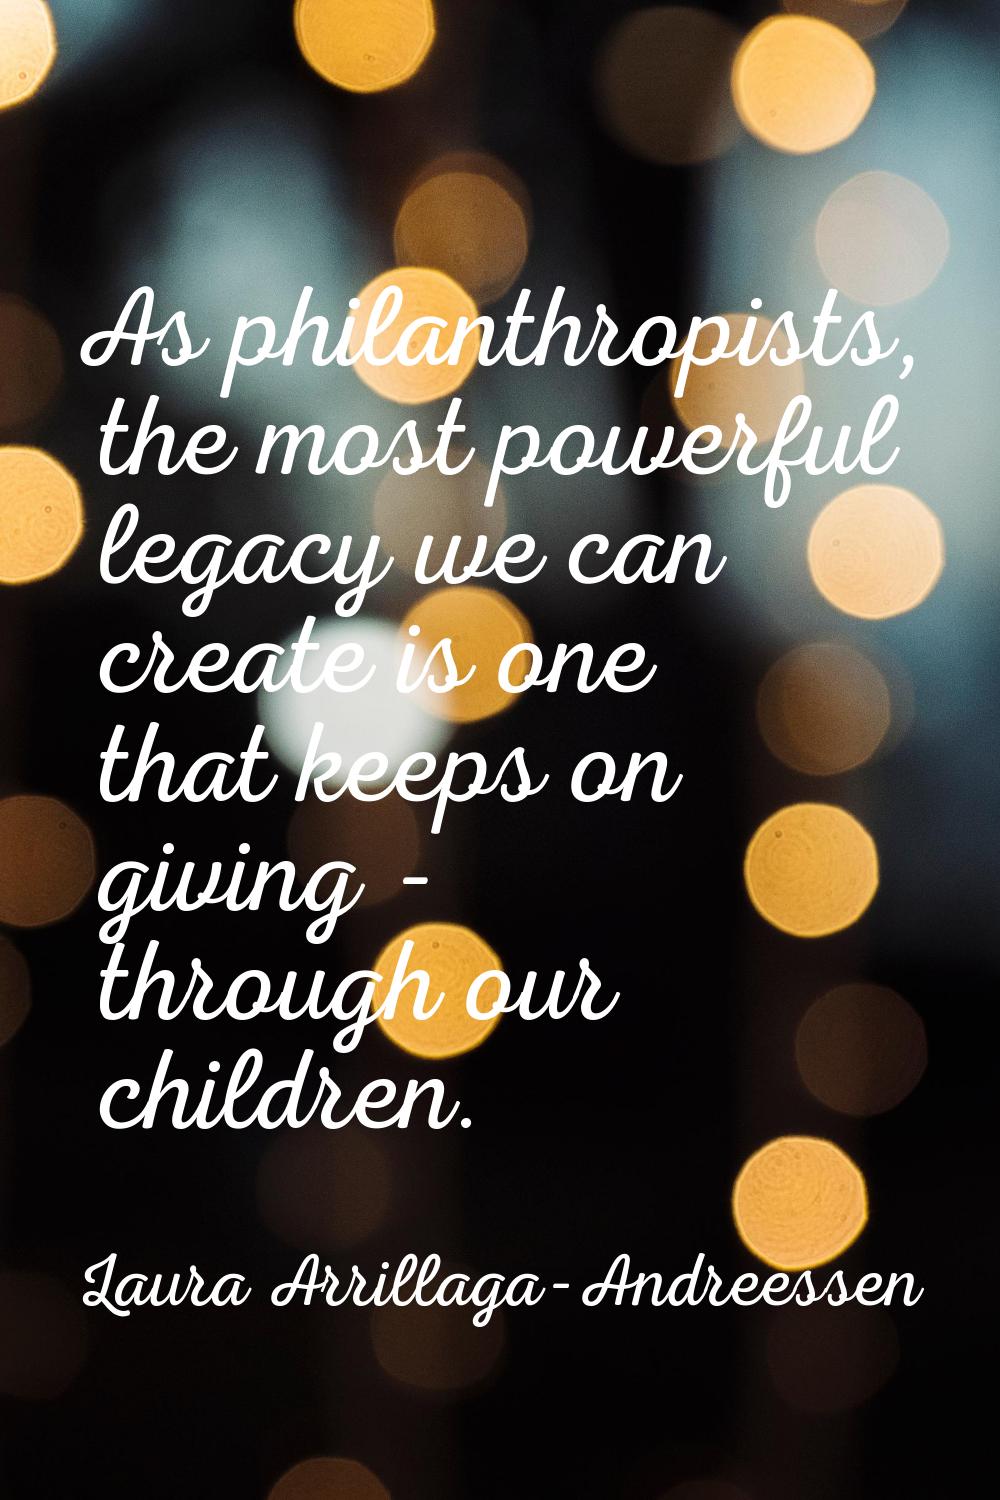 As philanthropists, the most powerful legacy we can create is one that keeps on giving - through ou